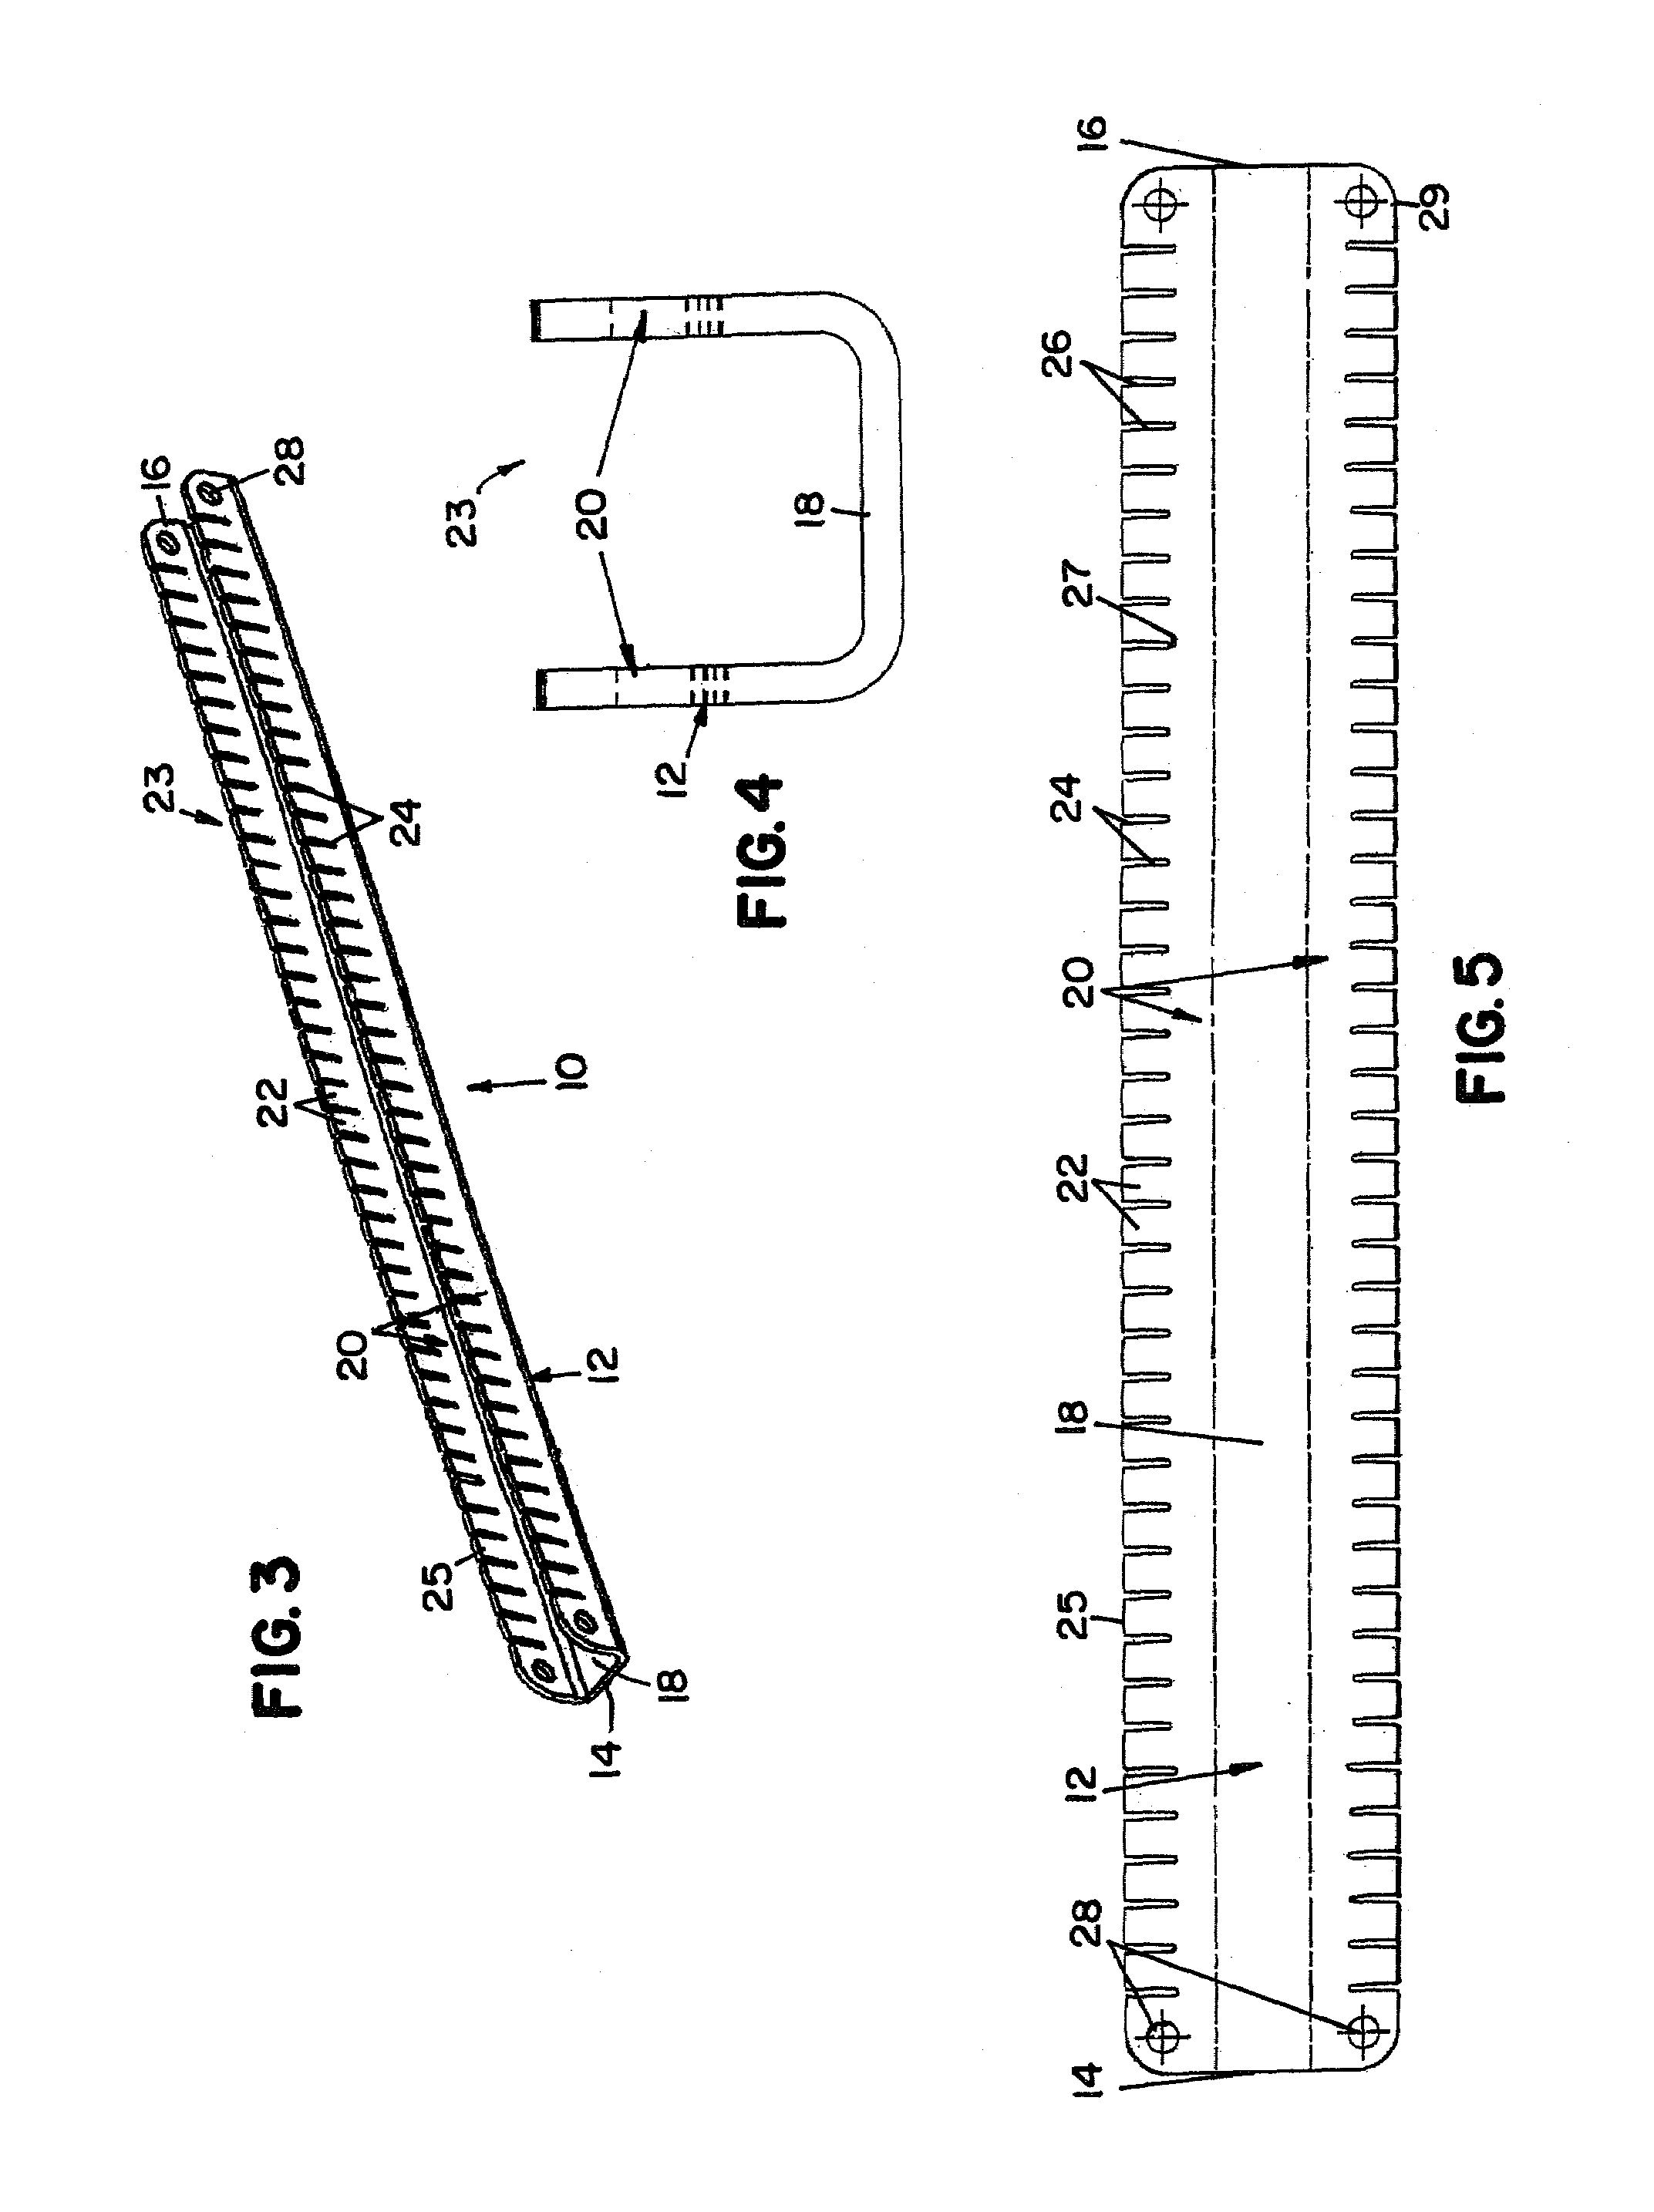 Overload indicator for a load supporting apparatus